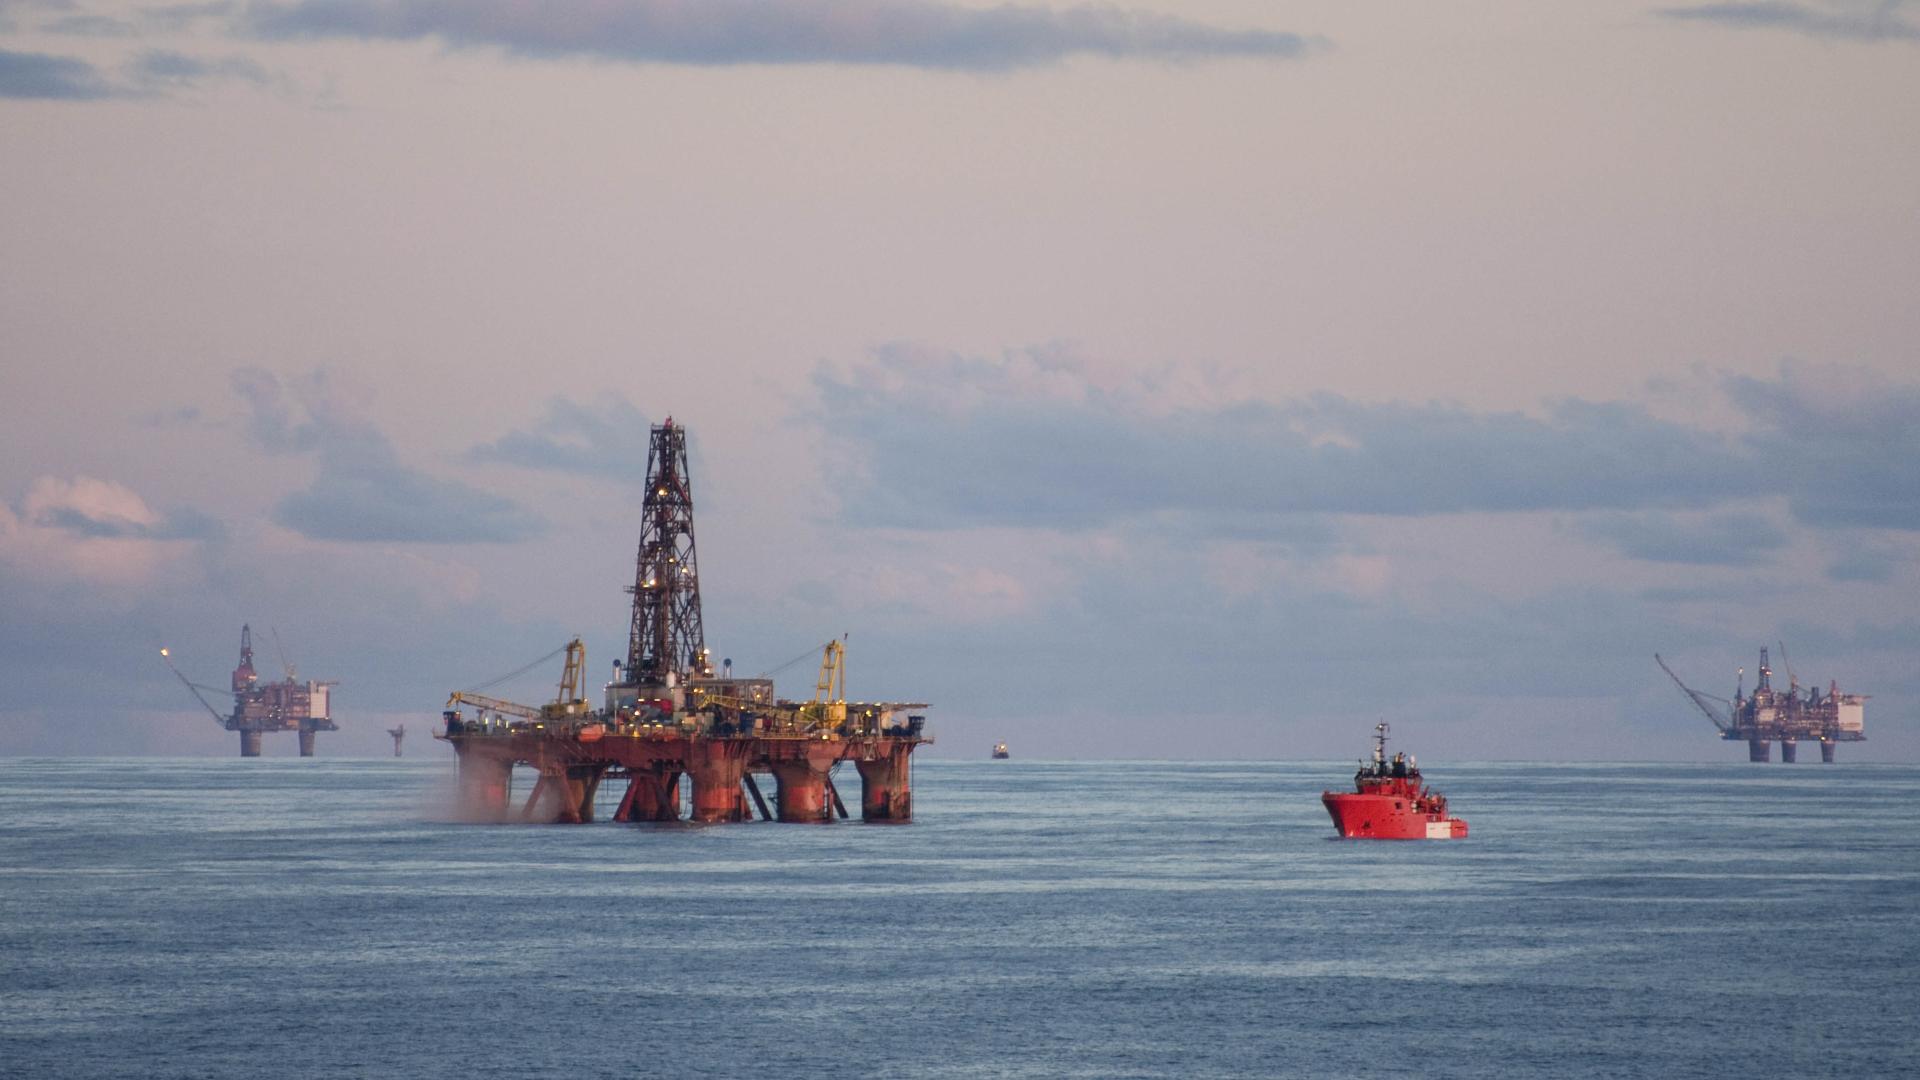 North sea drill rig surrounded by supply boats